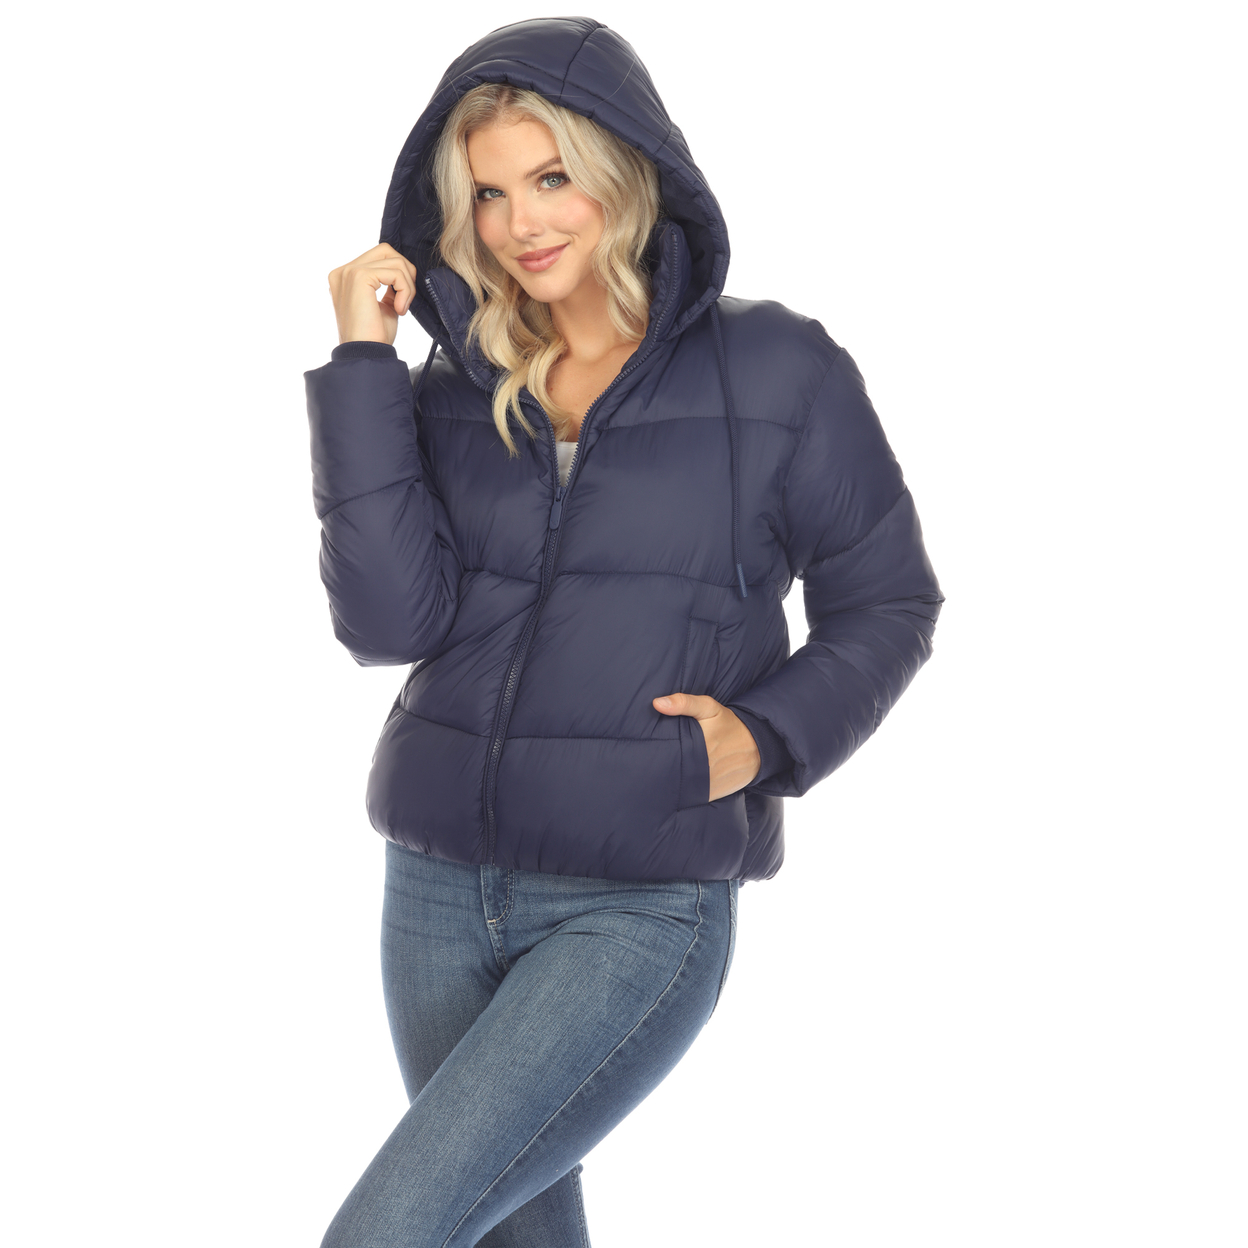 White Mark Women's Zip Hooded Puffer Jacket With Pockets - Blue, 1x